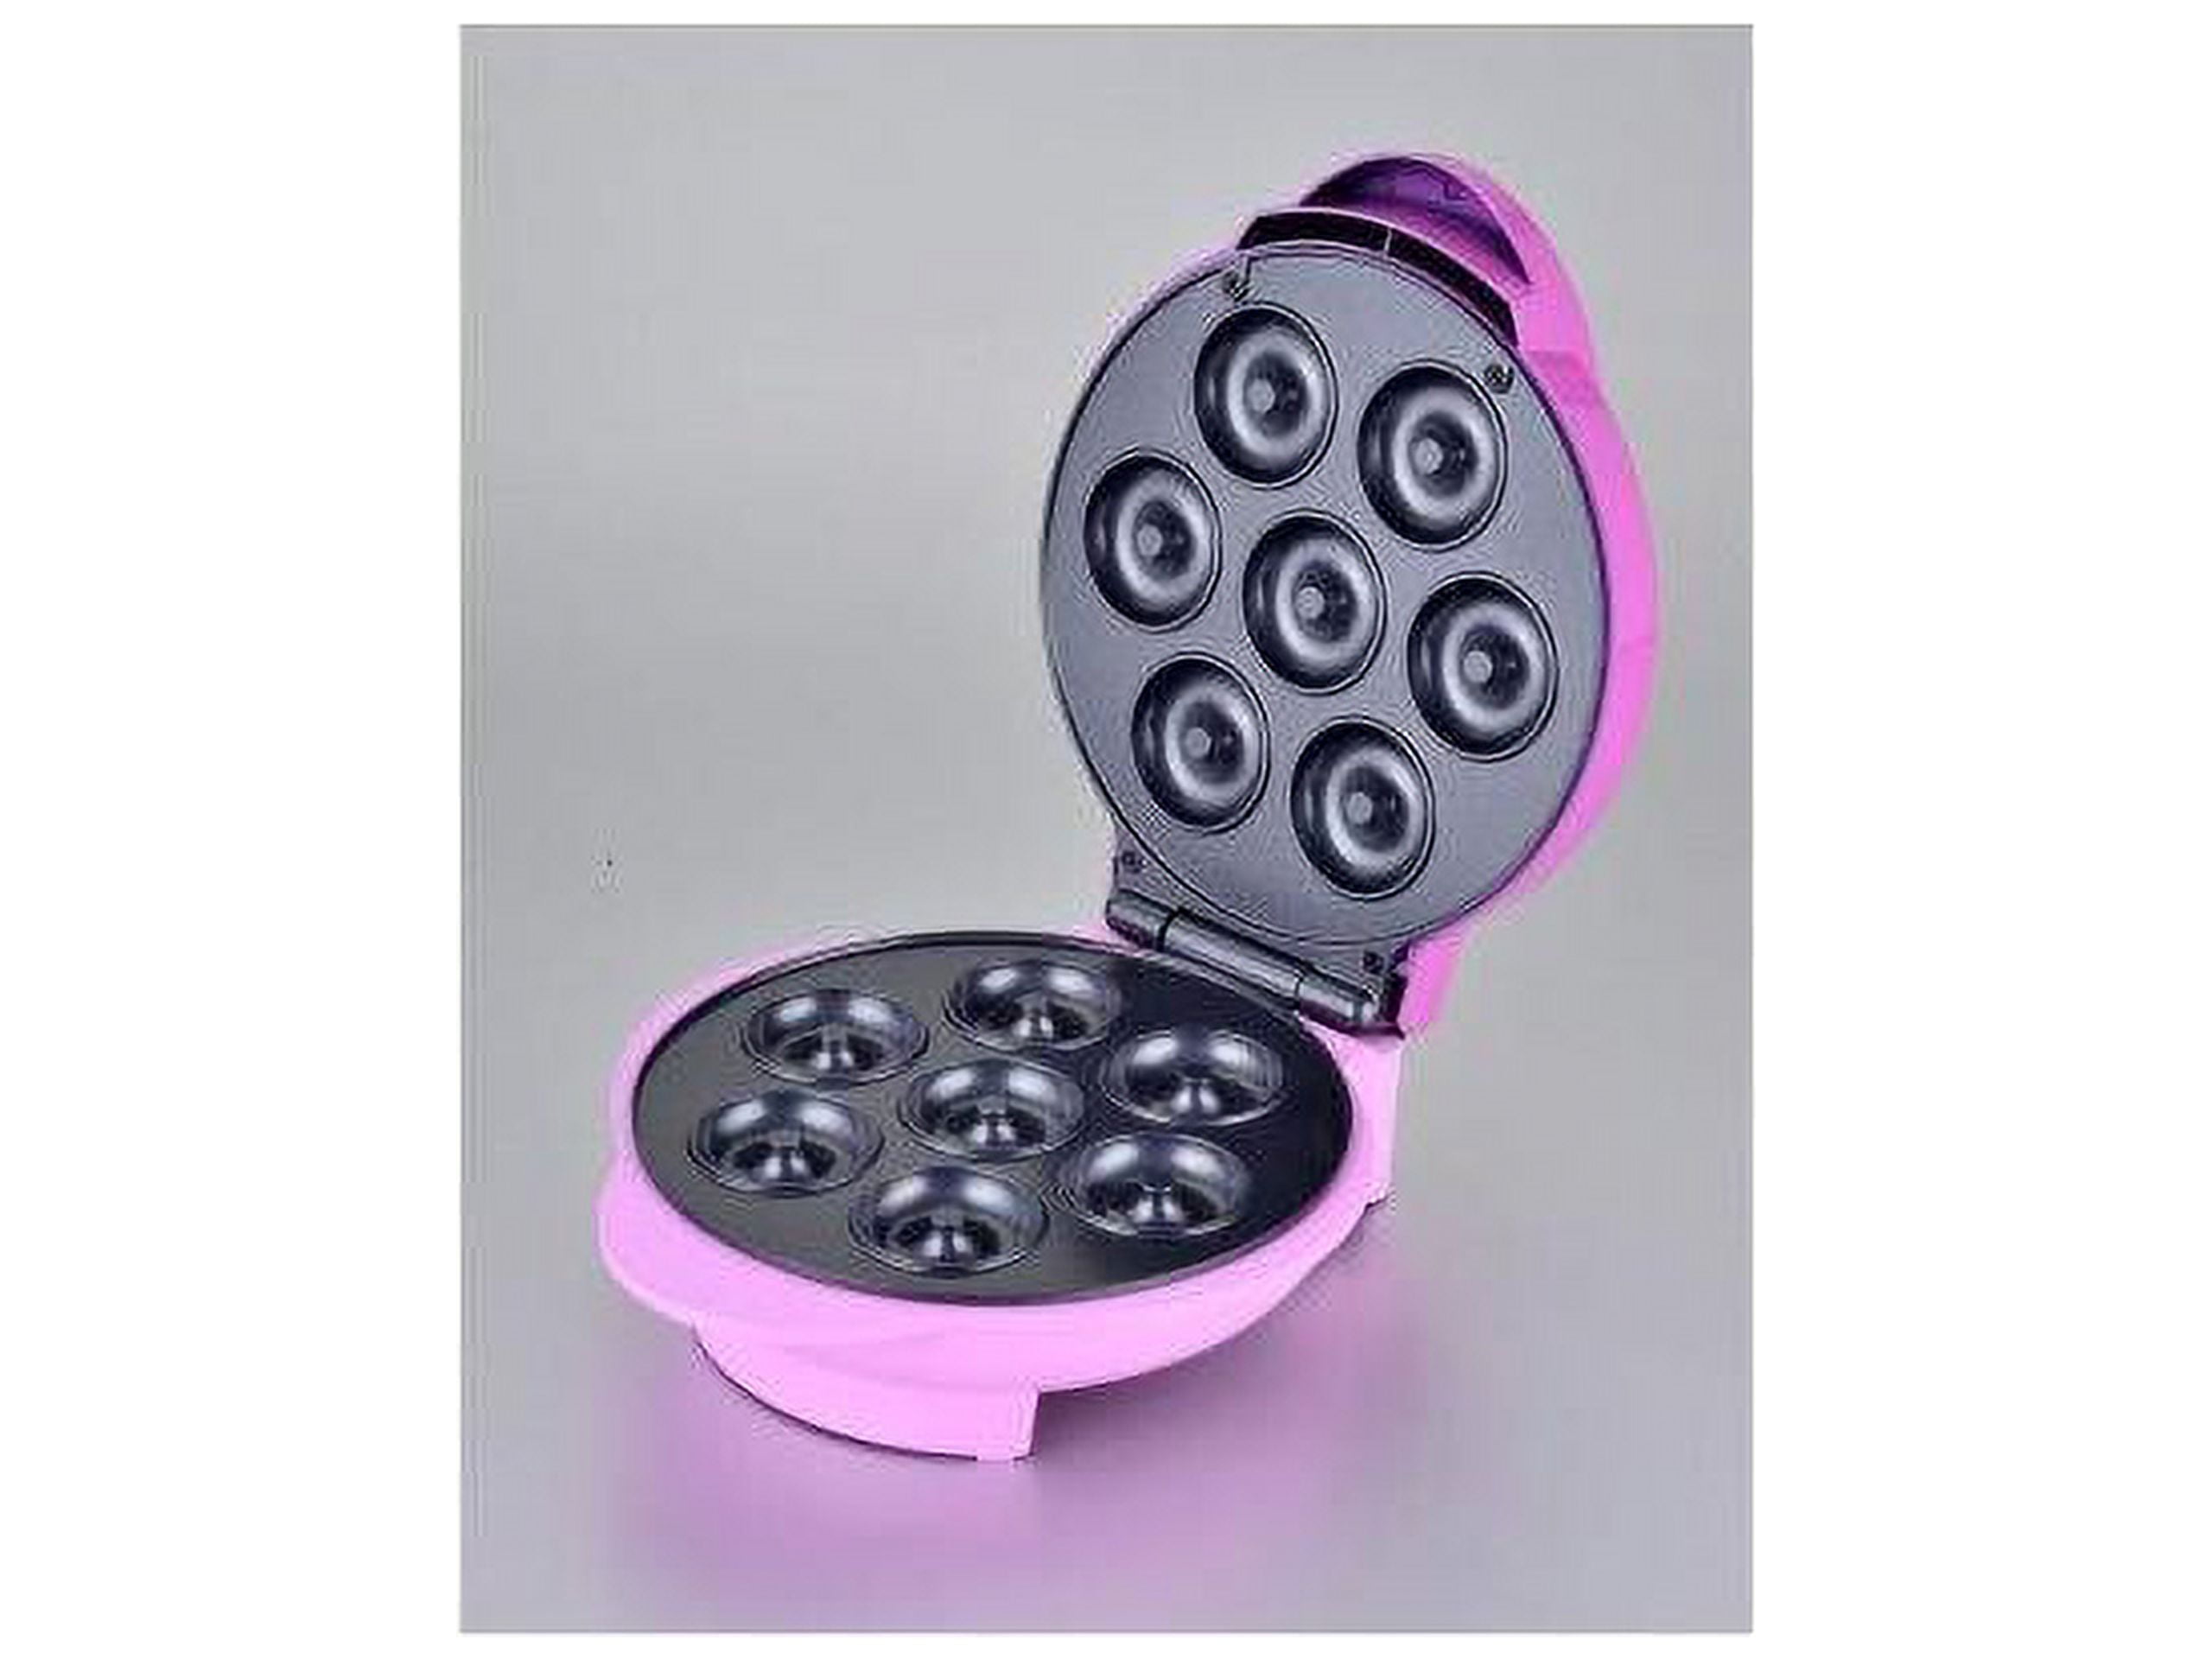 Brentwood Appliances 750 W Pink Electric Food Maker (Mini Donut Maker)  Nonstick TS-250 - The Home Depot